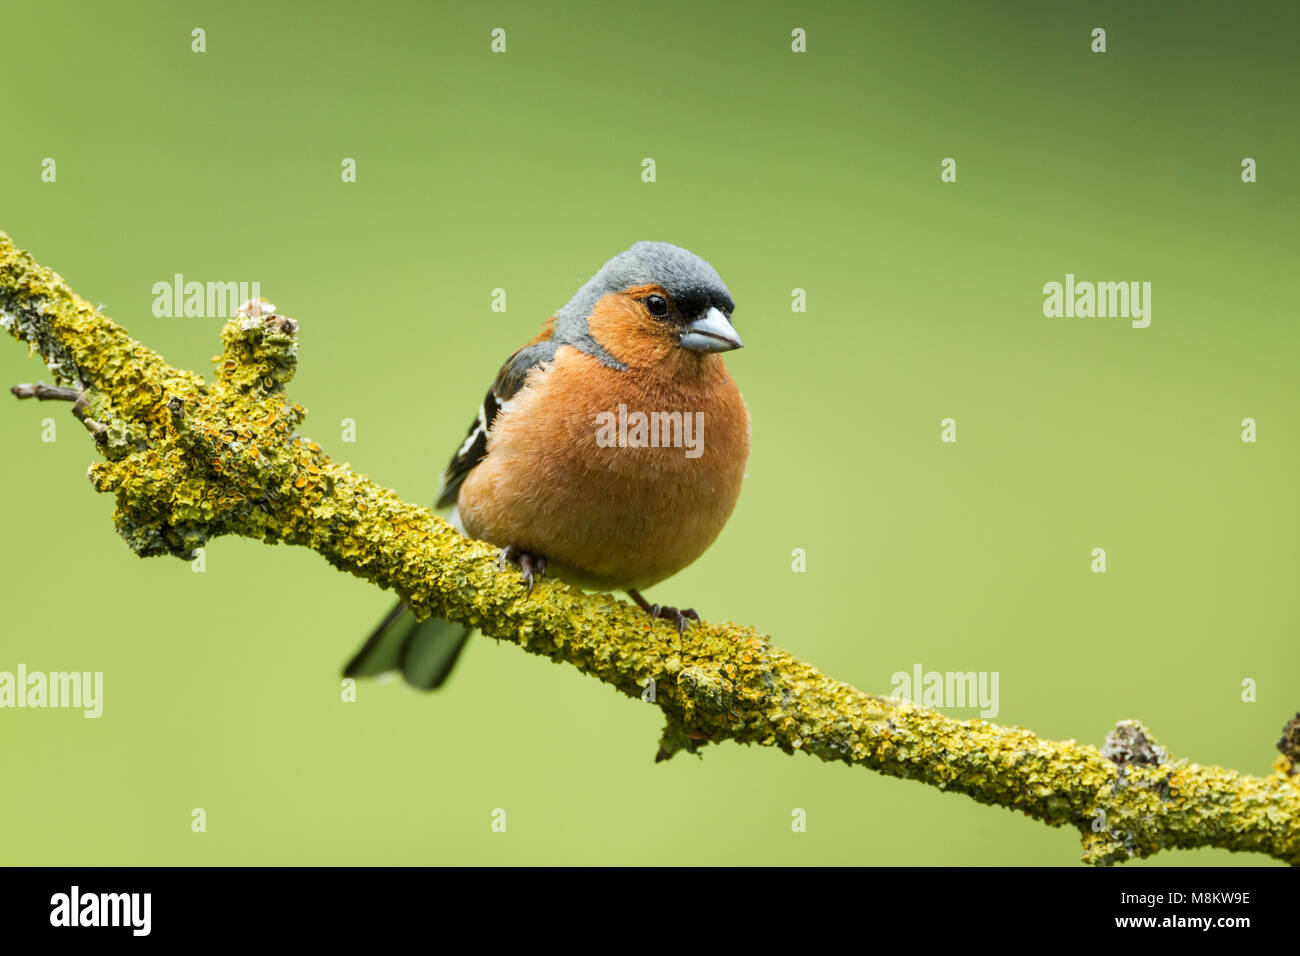 Male chaffinch, Latin name Fringilla coelebs, perched on a colourful lichen covered twig against a green background Stock Photo